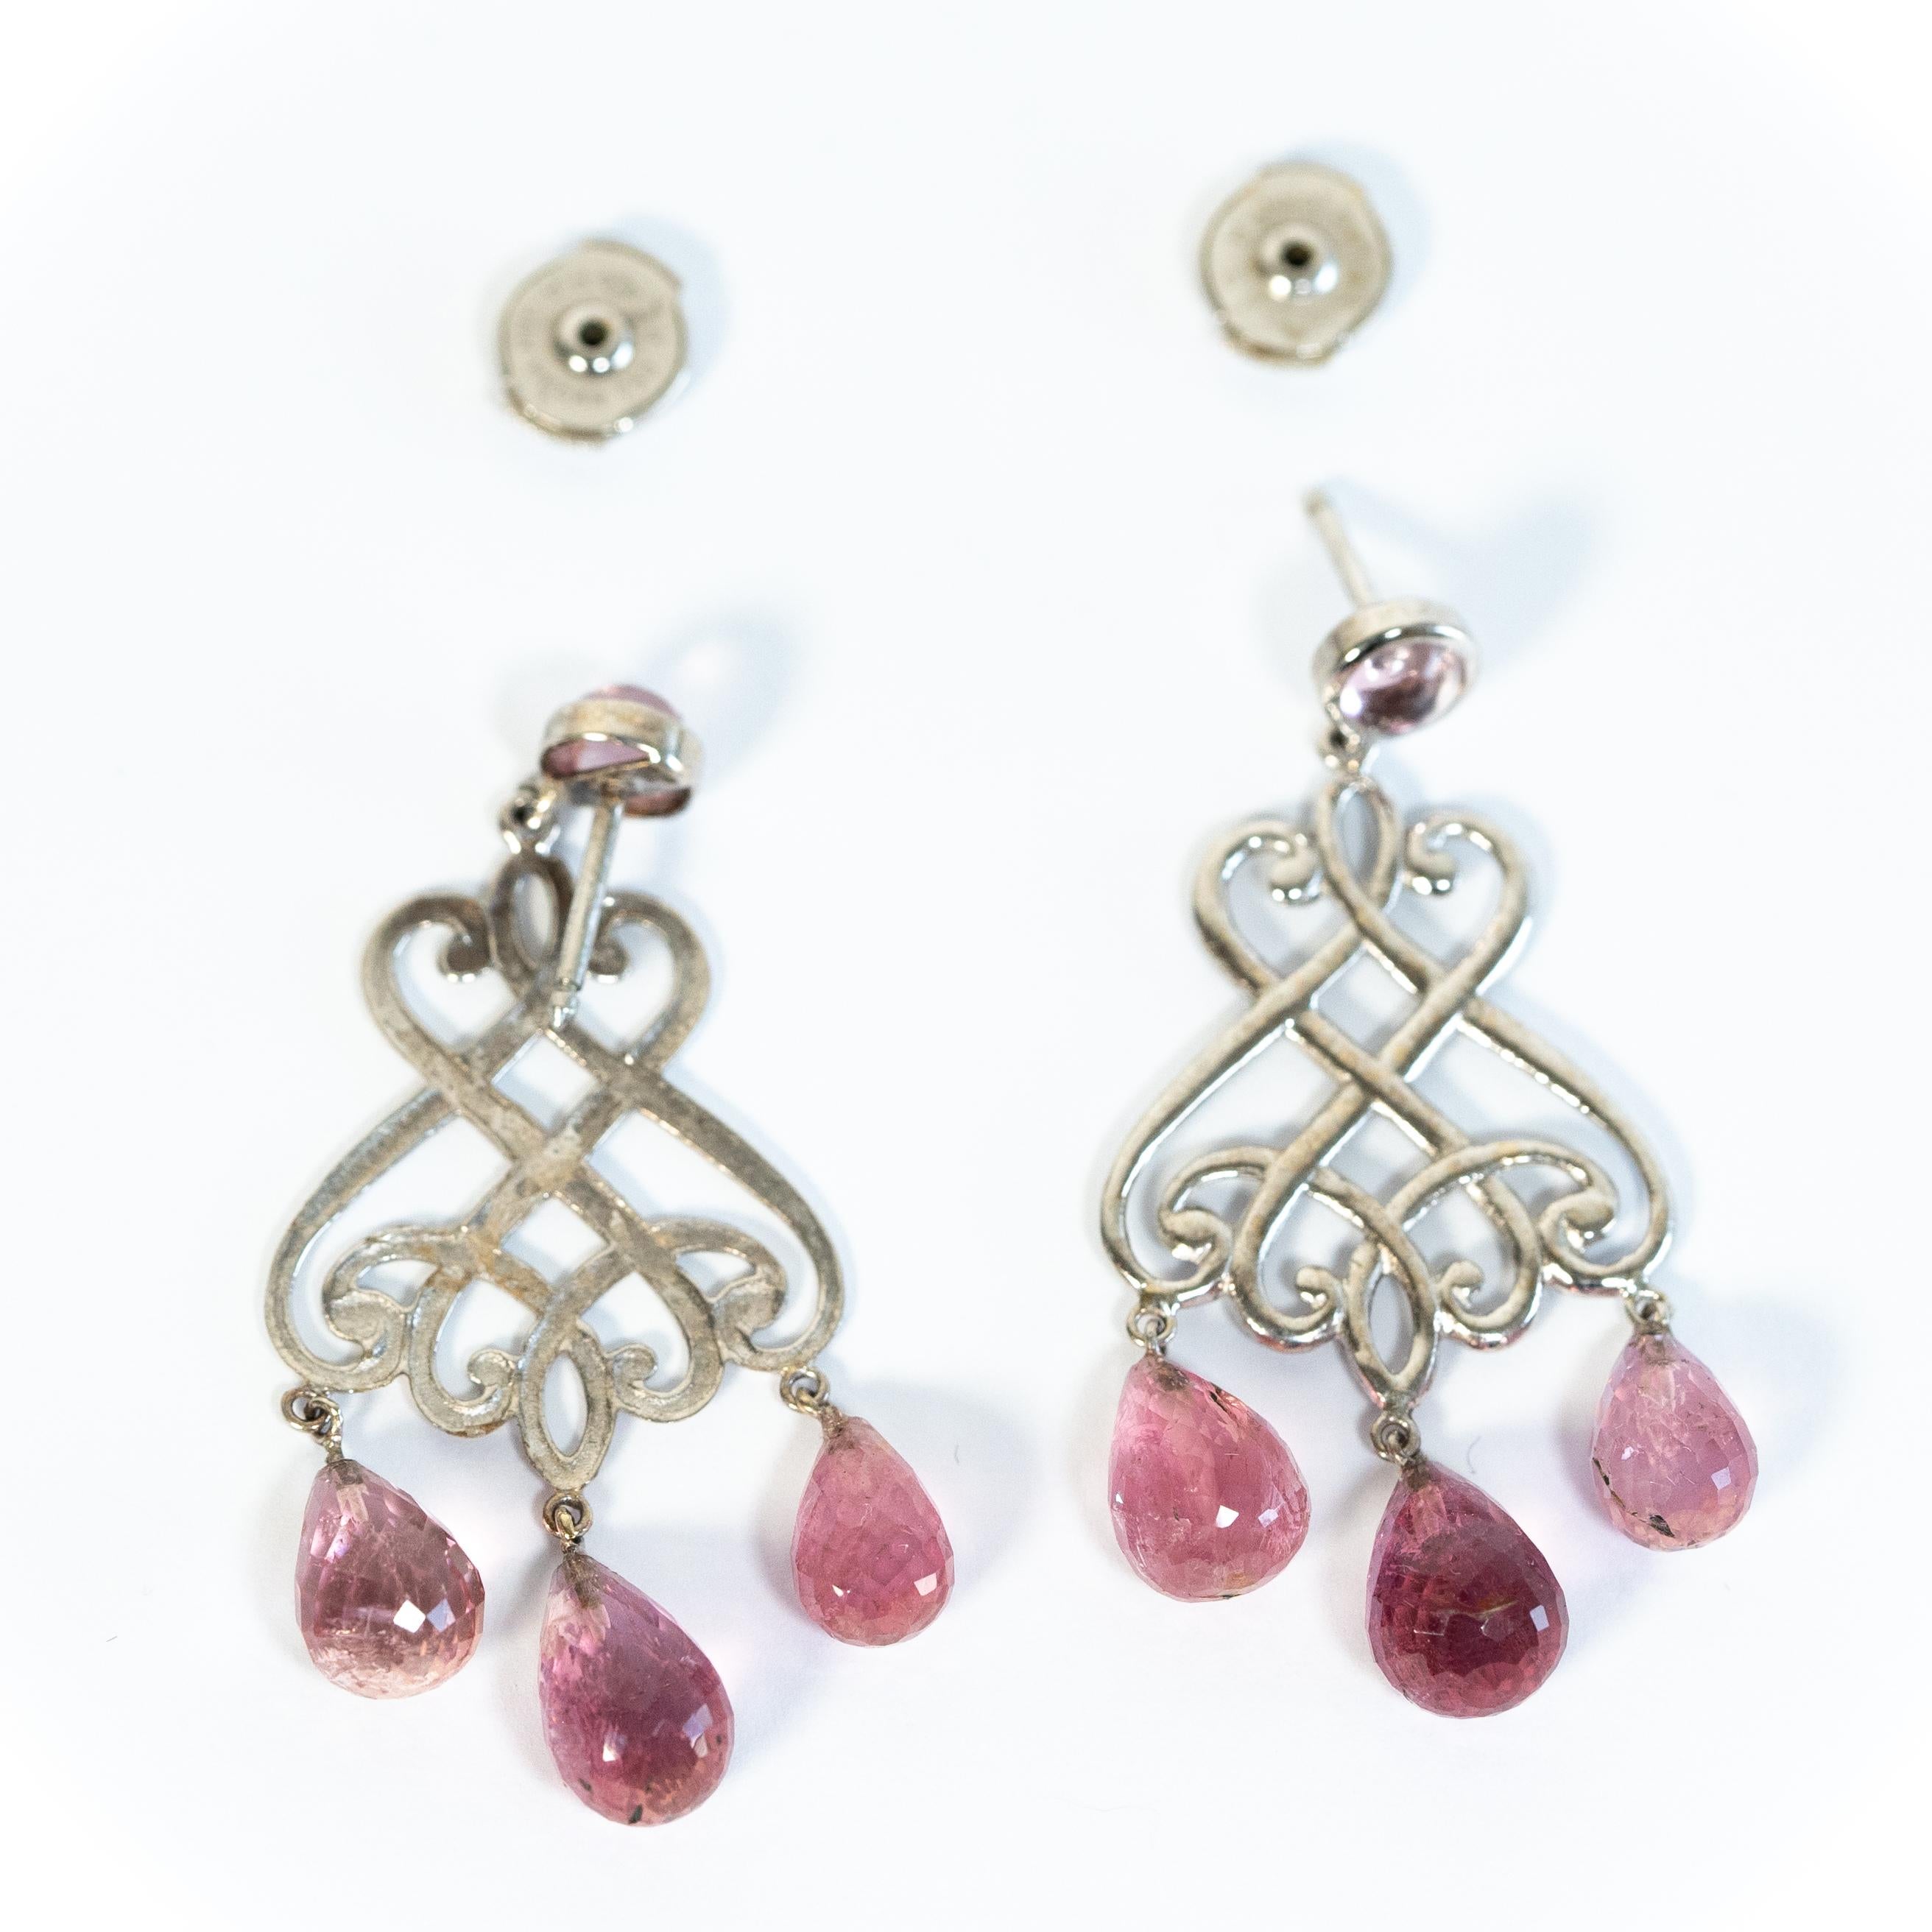 18K white gold chandelier earrings set with two pink tourmalines cabochons and six pink tourmalines briolettes.
Alpa security system.
earrings total weight : 7,69 g
Pink tourmalines cabochons : 1,18 carats
Pink tourmalines briolettes : 15,21